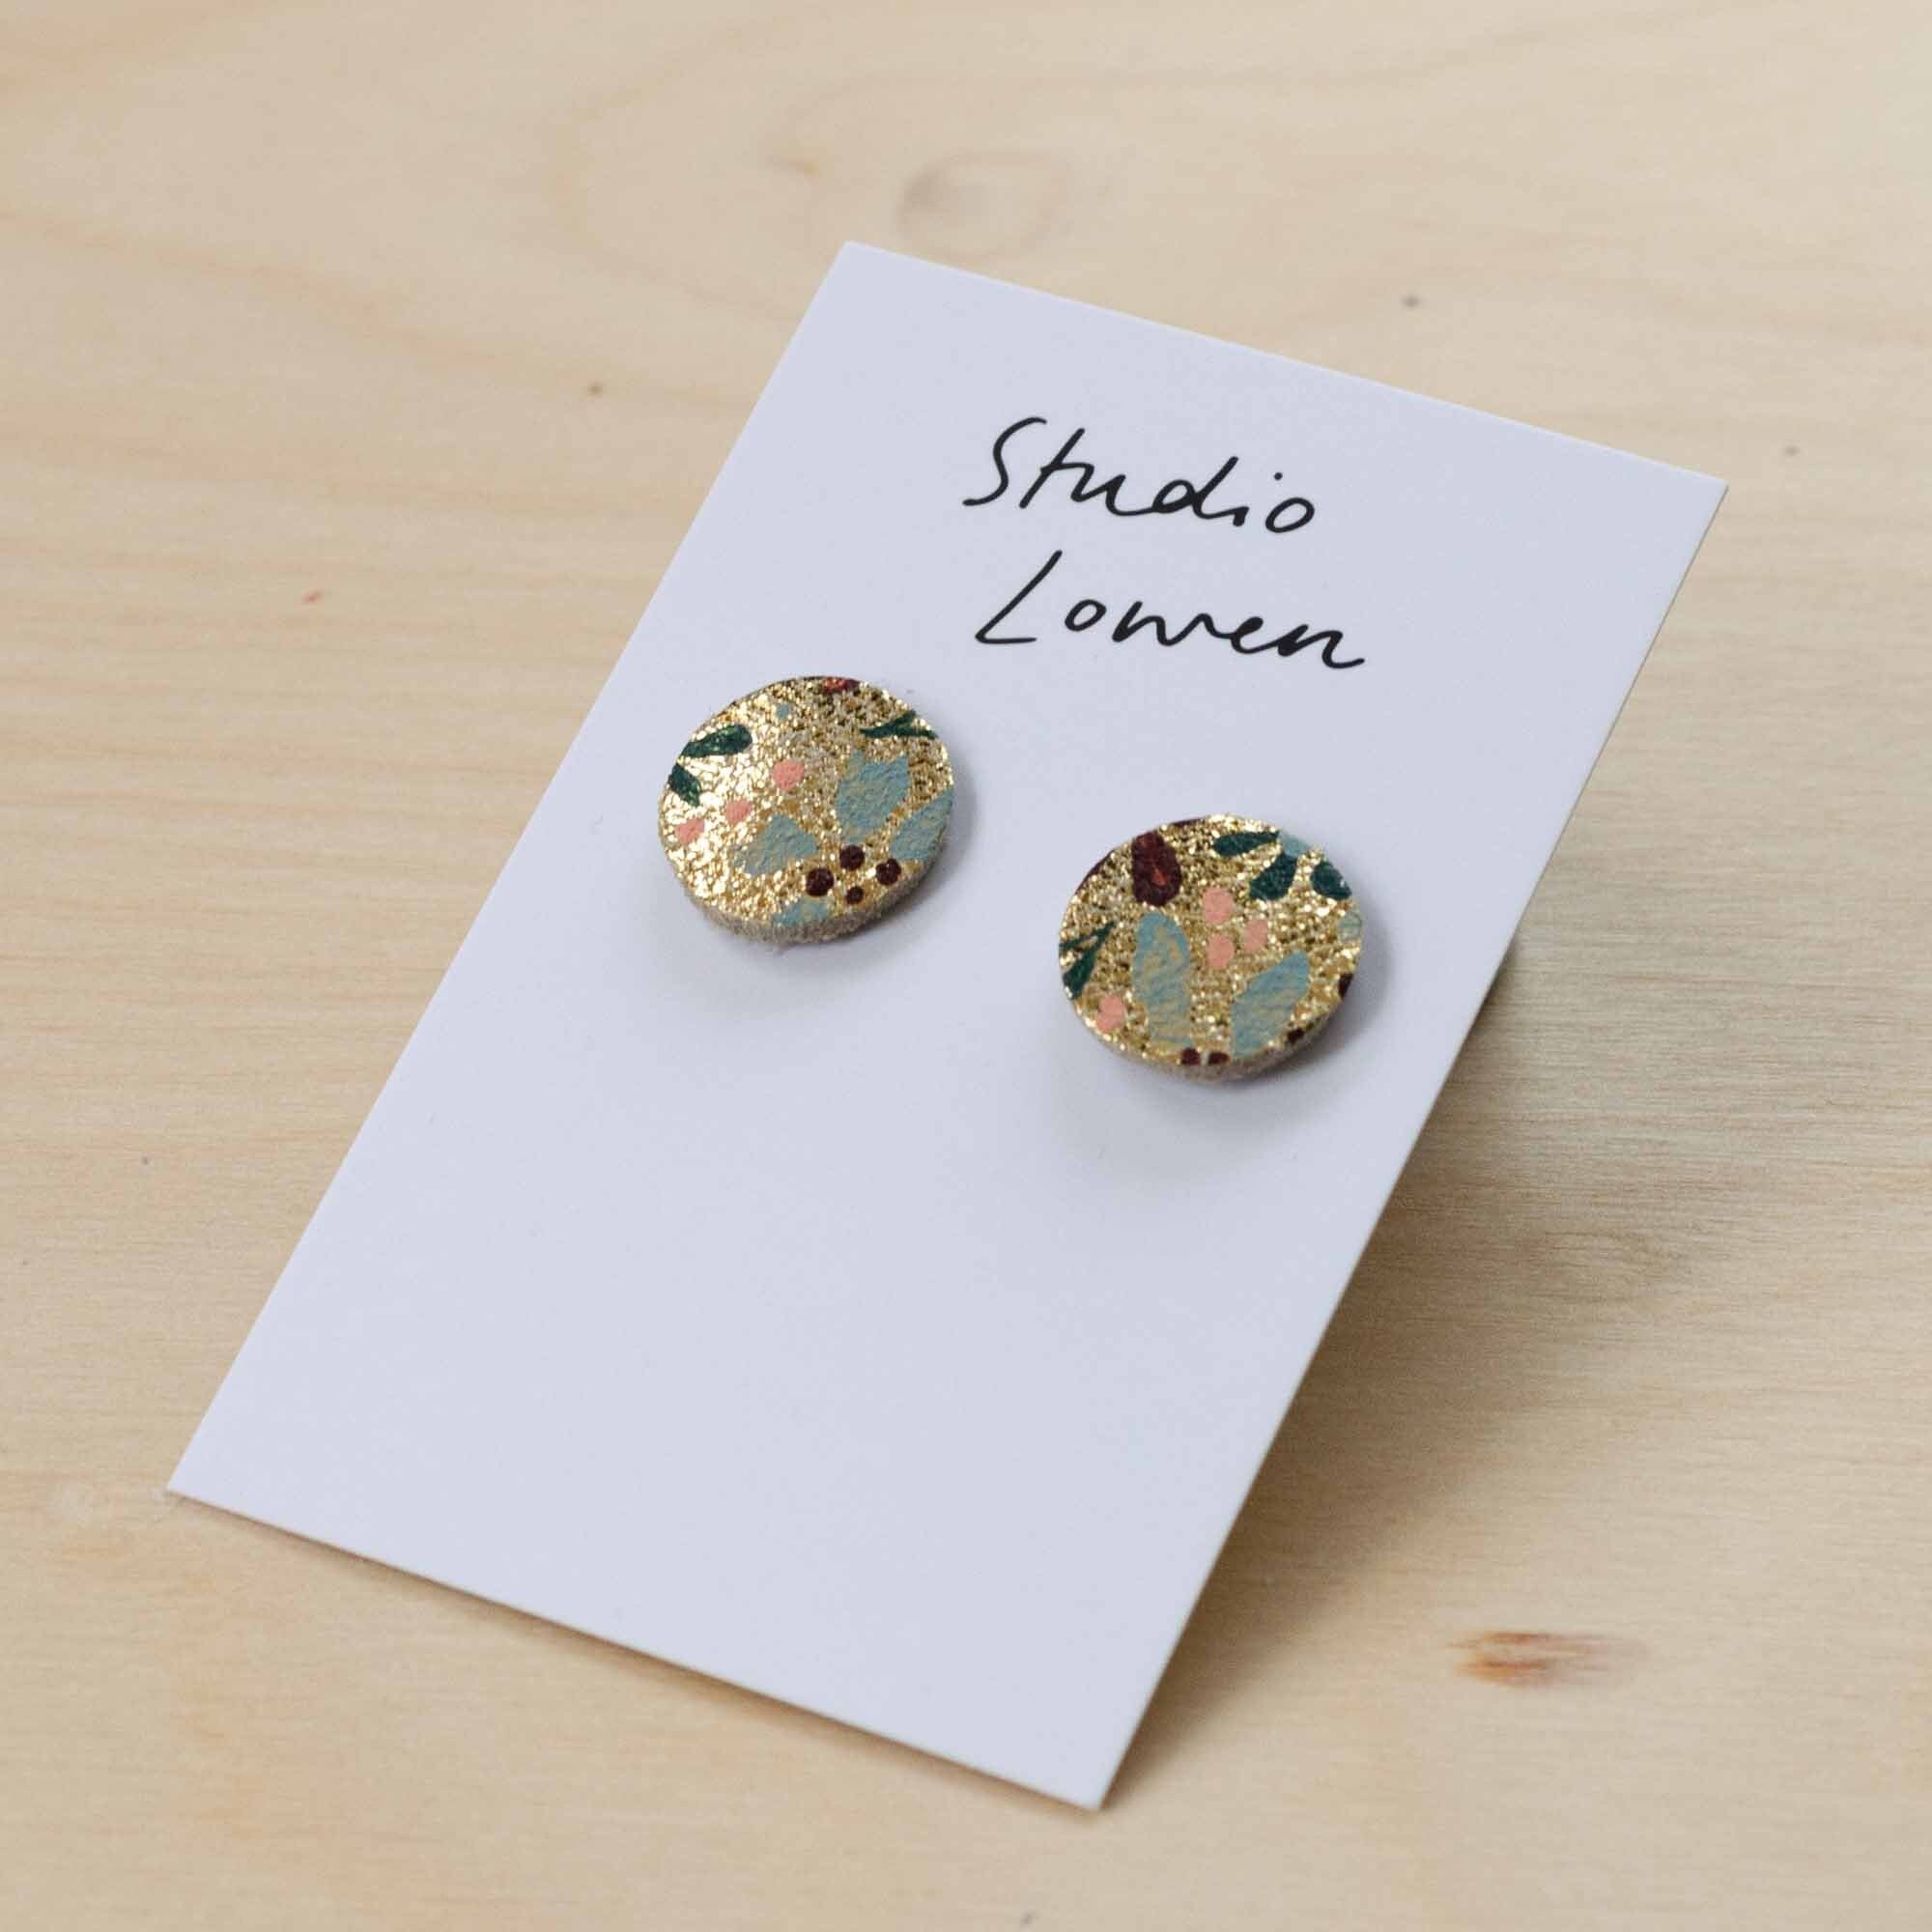 Simple Floral Stud Earrings, Gold Handpainted Eco-Friendly Earrings in Pastel Colours & Autumn Botanicals. Clip On Earrings